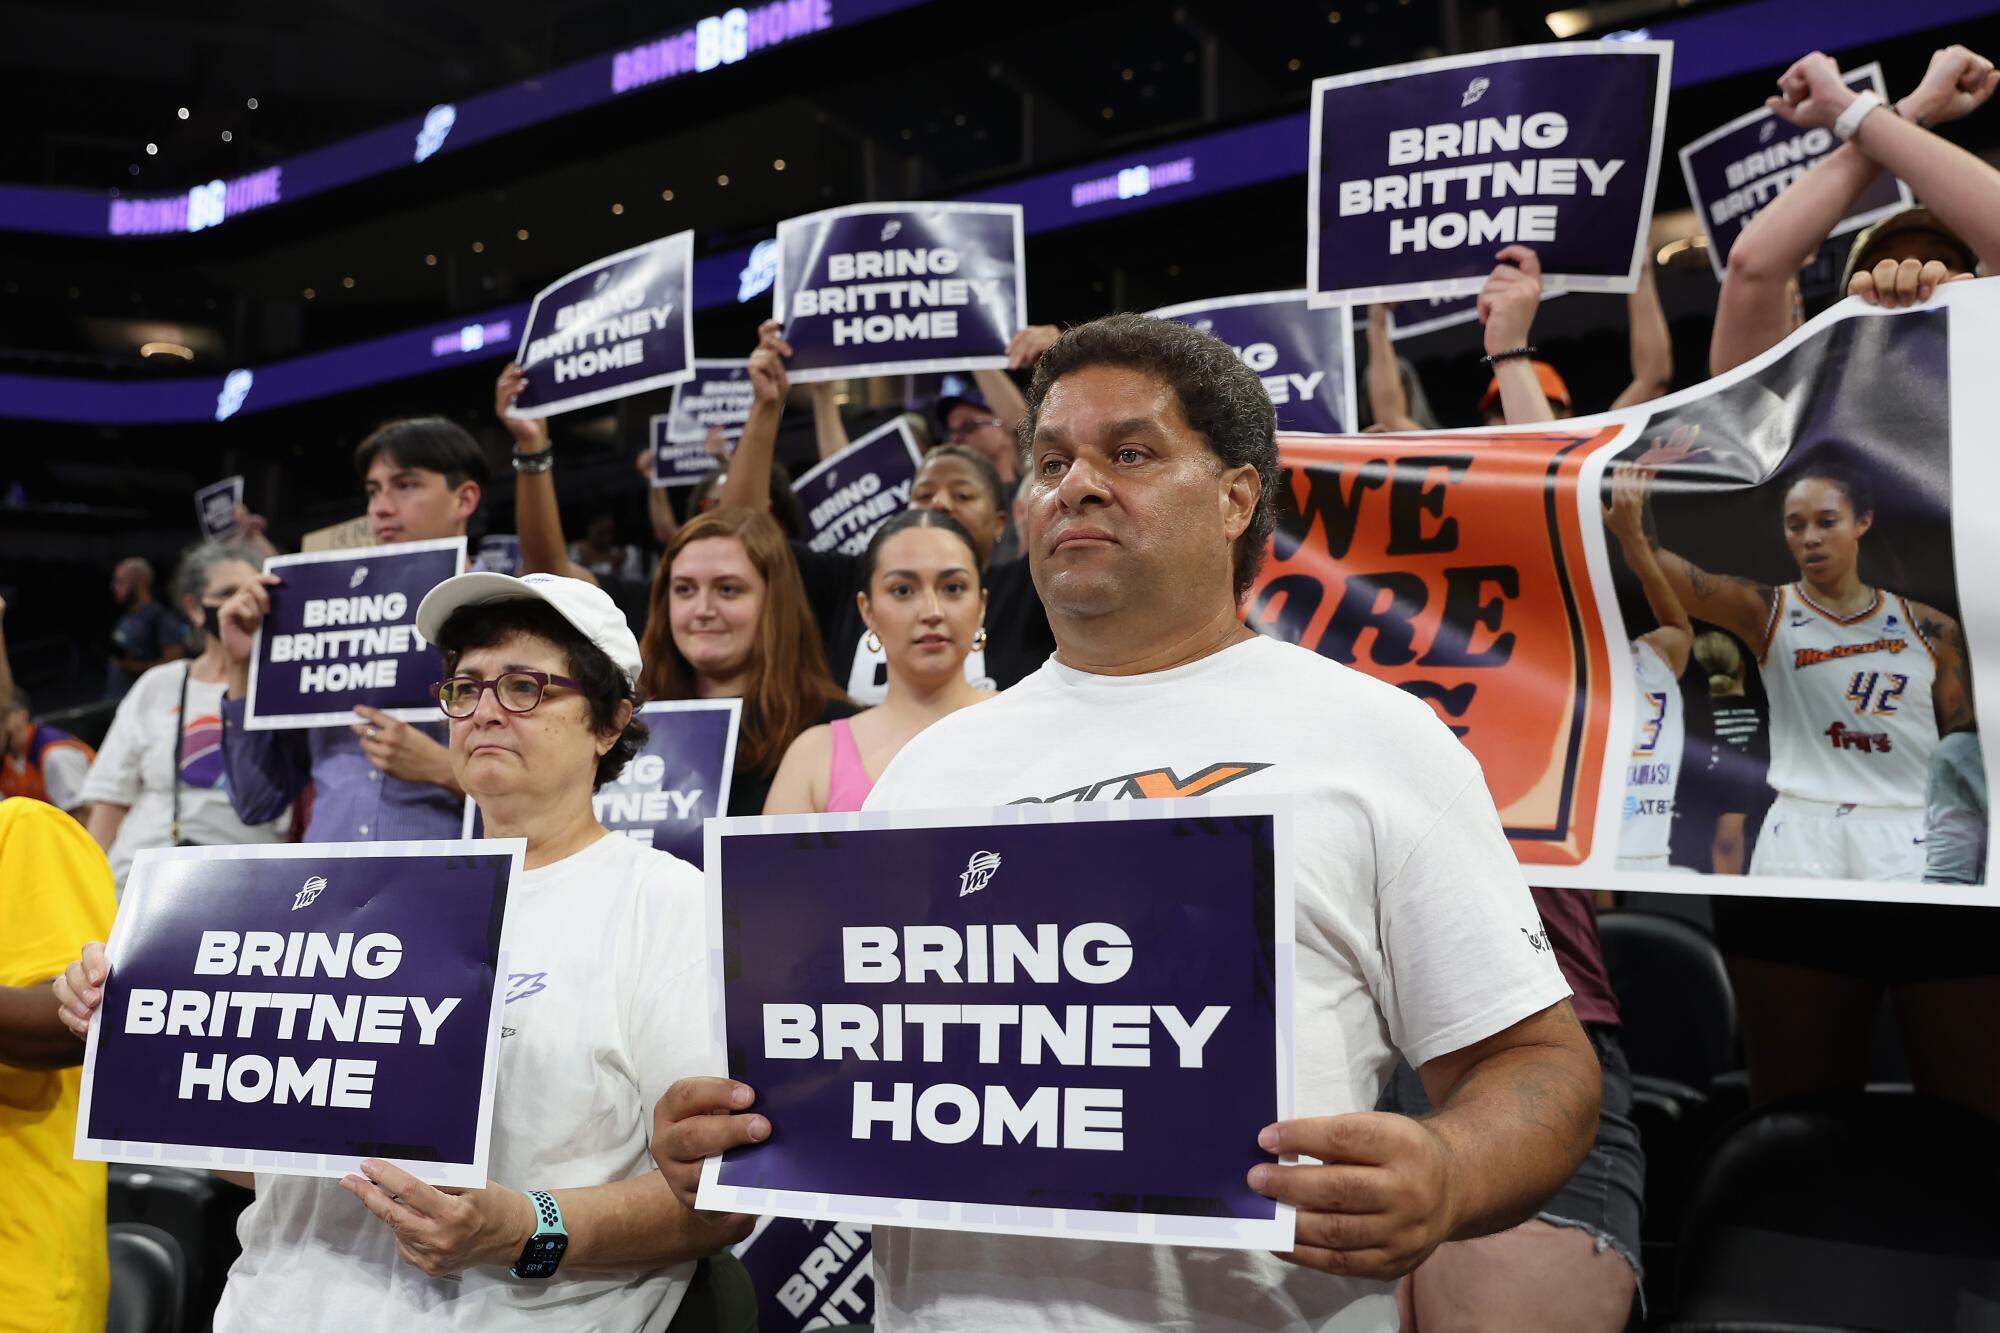 Supporters hold up signs reading "Bring Brittney Home" during a rally to support the release of Britney Griner.